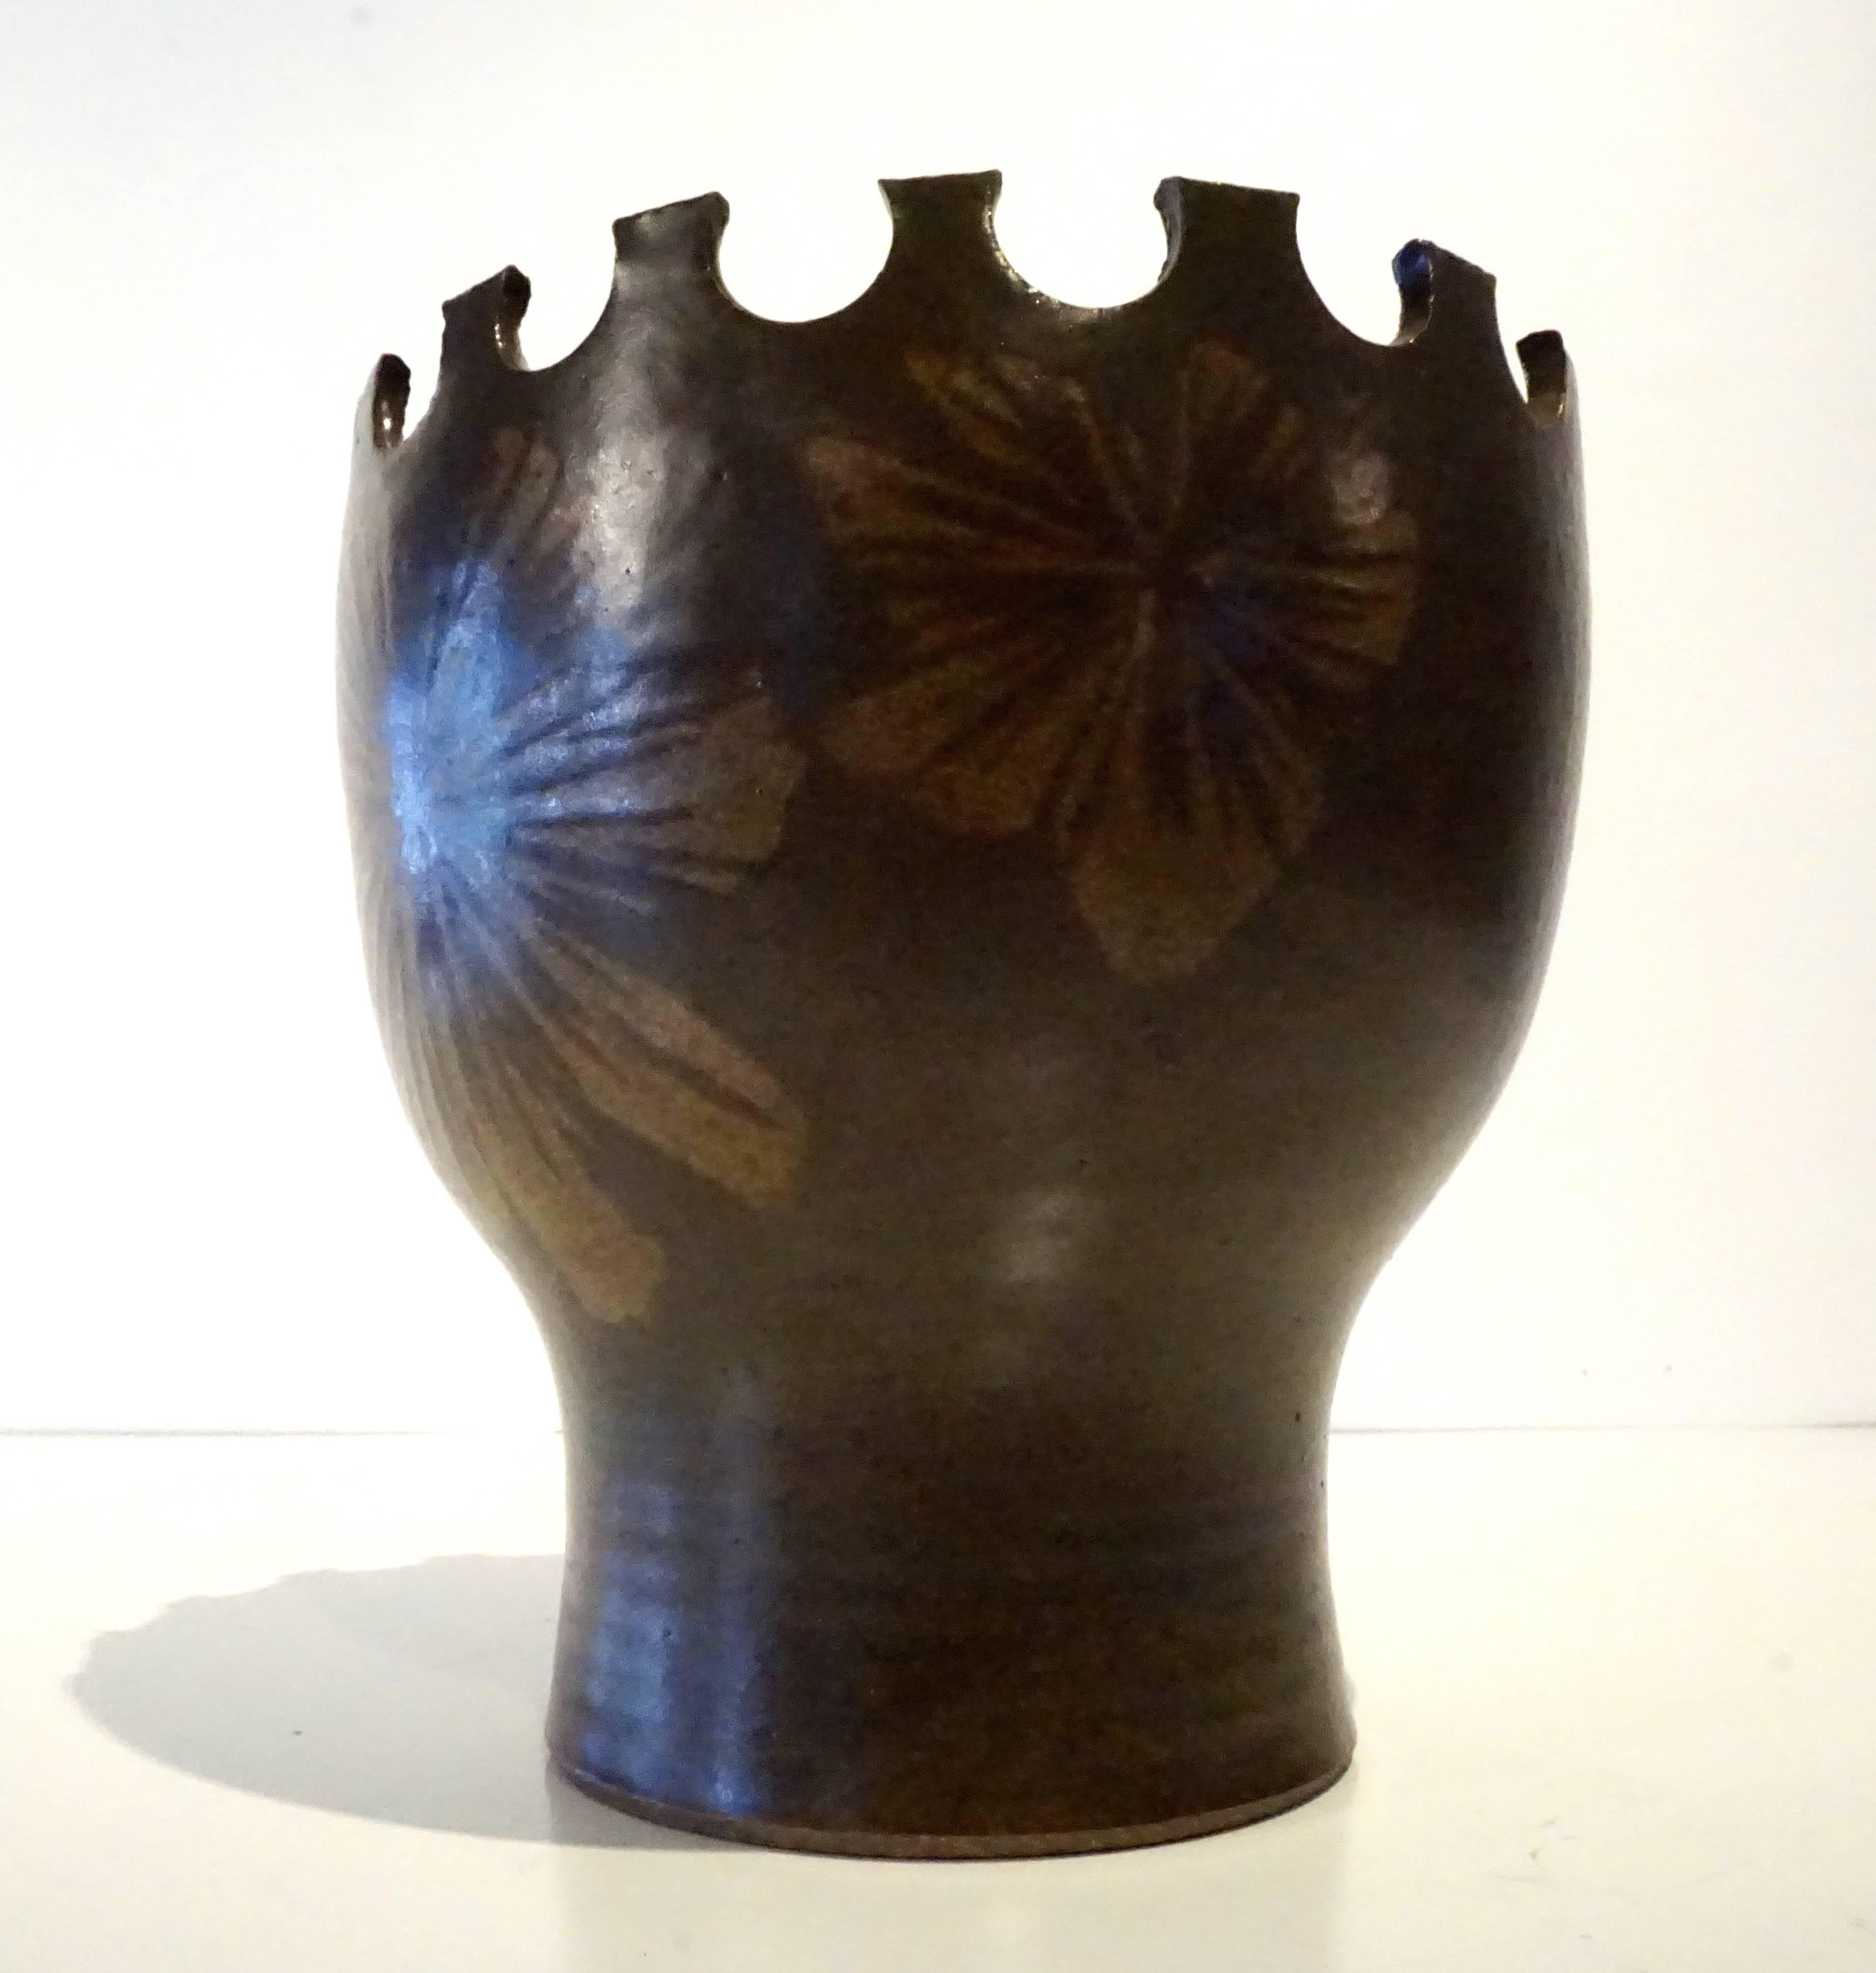 A hand-thrown and glazed ceramic vessel by California Studio ceramicist Robert Maxwell. This circa 1960s bowl features a distinctive crenellated edge that makes the vessel reminiscent of an English Monteith bowl. The vessel is glazed in a brown to